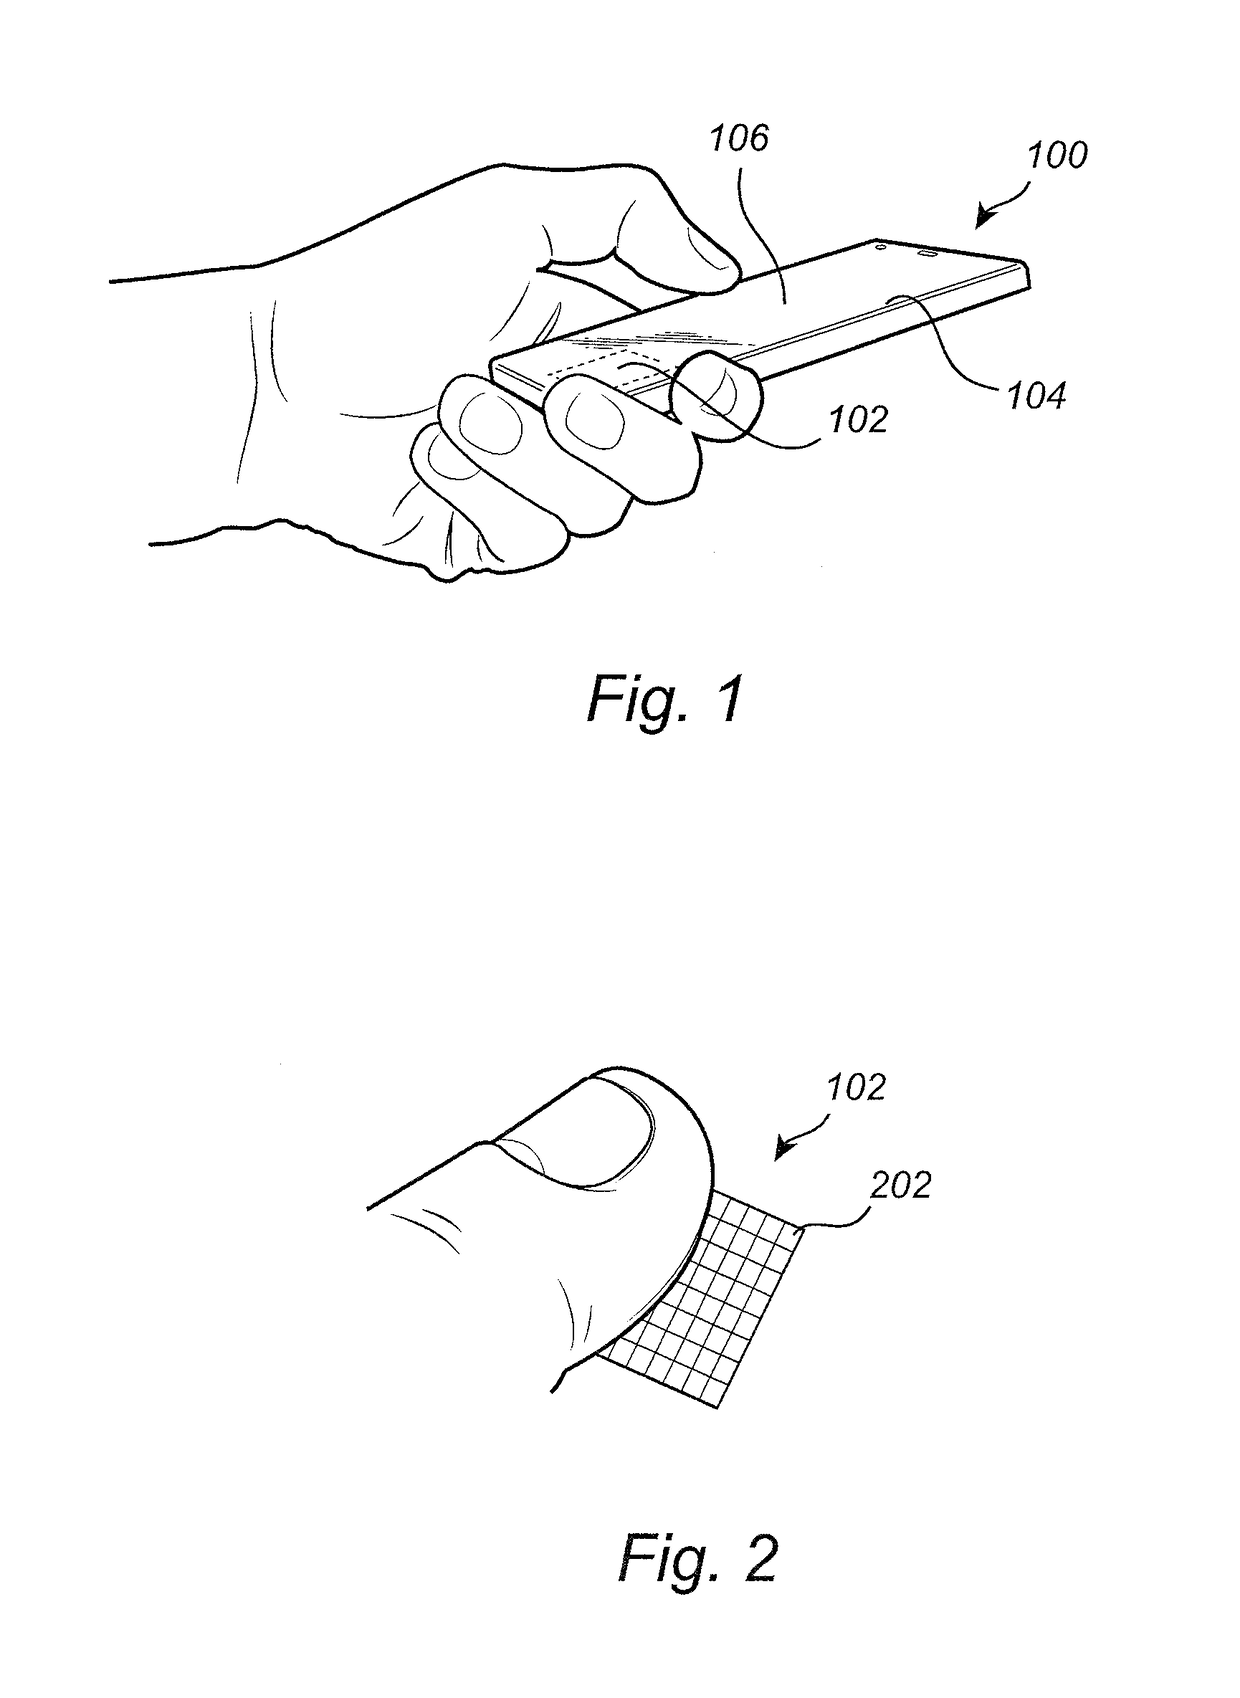 Method and fingerprint sensing system for analyzing biometric measurements of a user